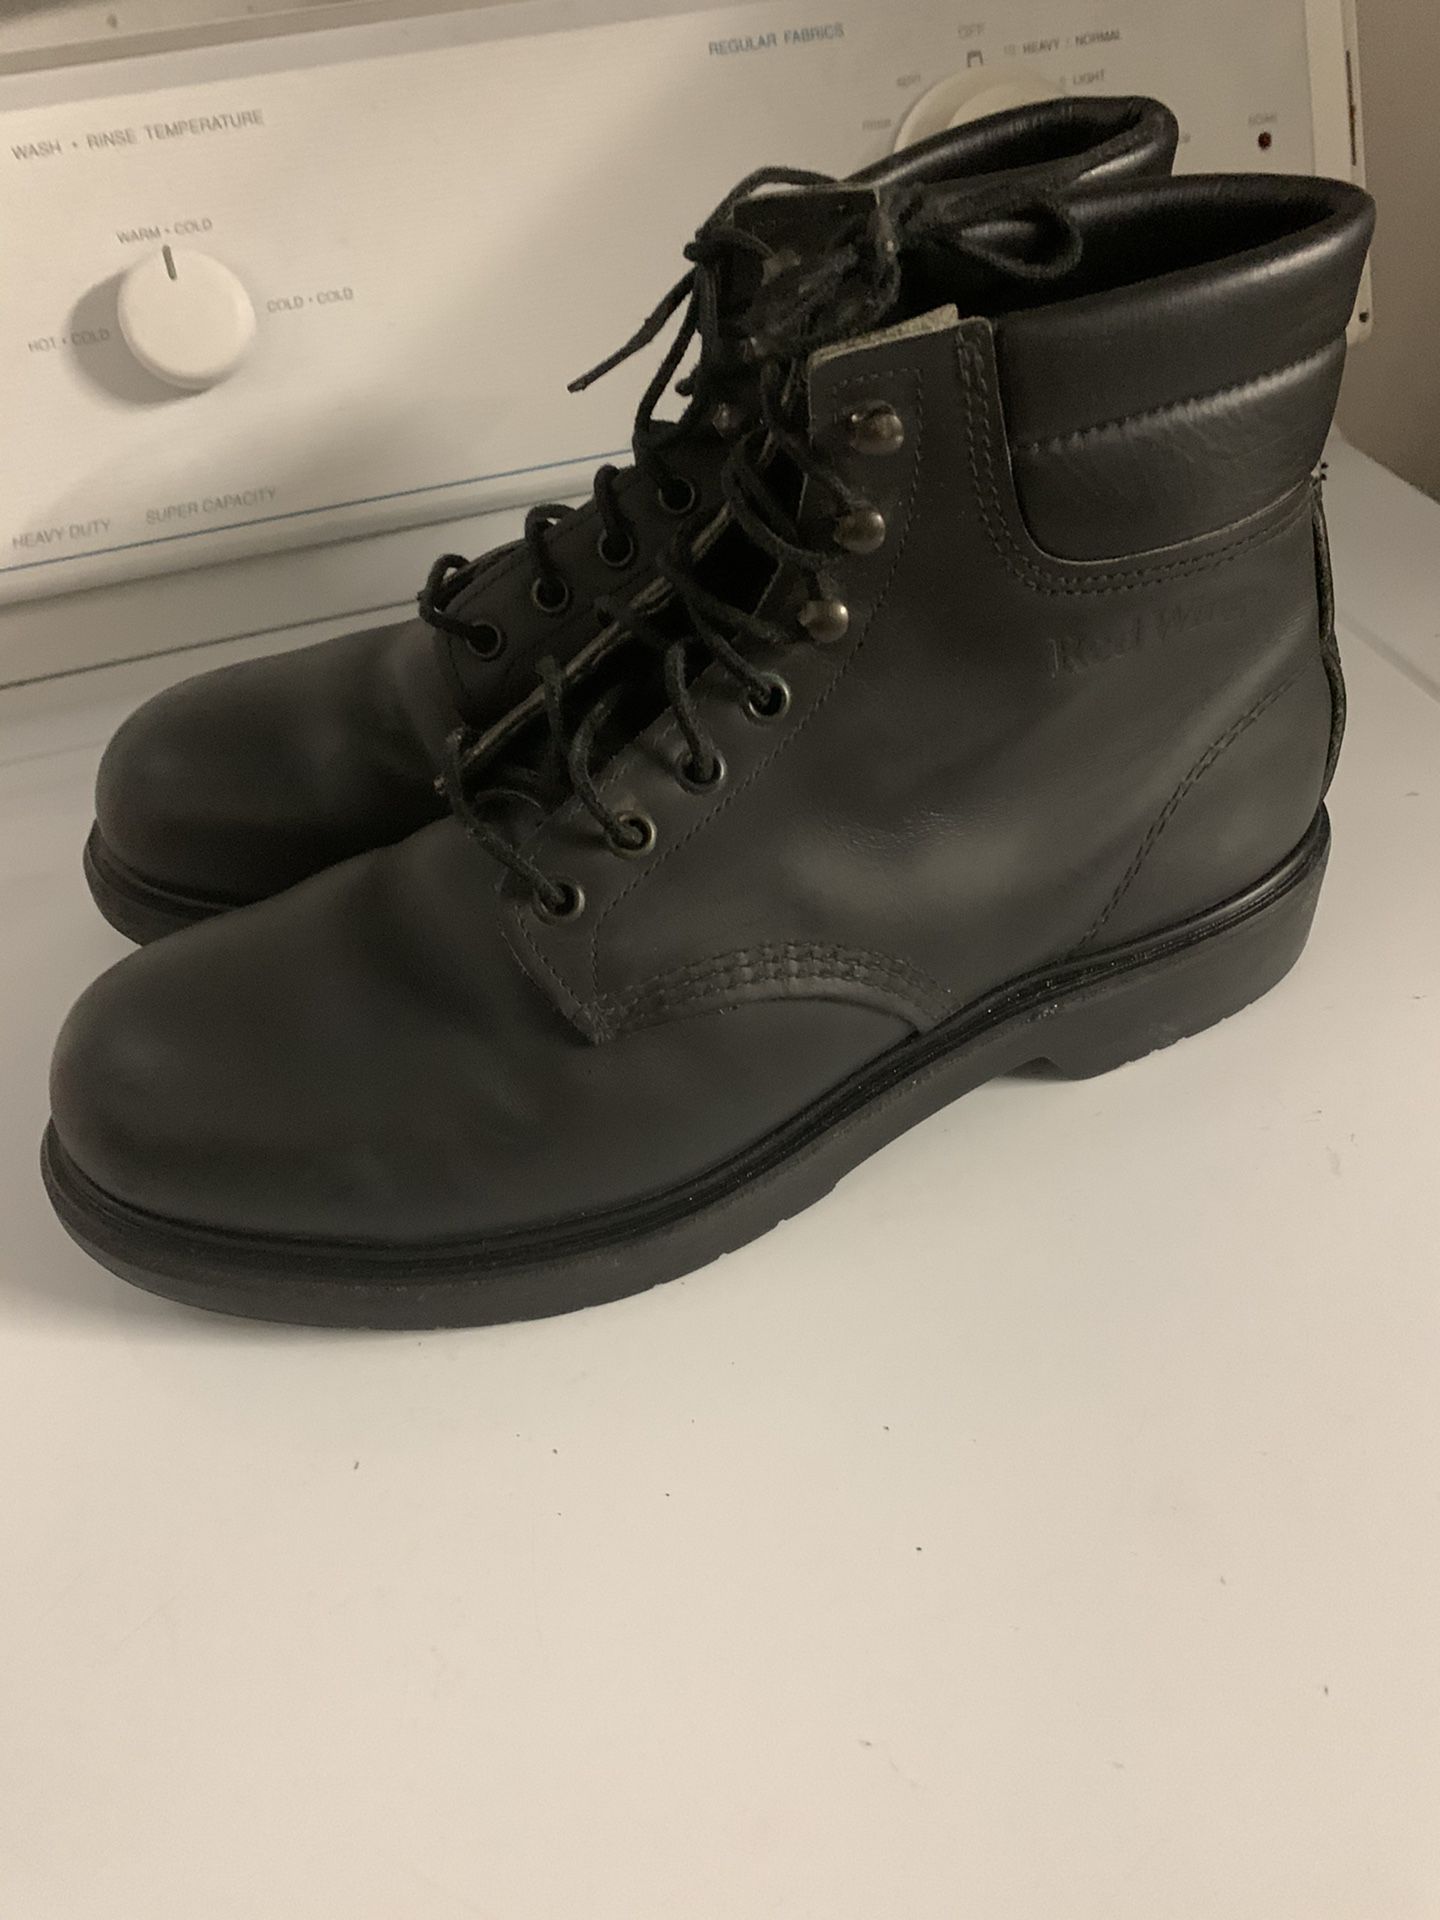 Working boots red wings old school boots steel toe for Sale in Santa ...